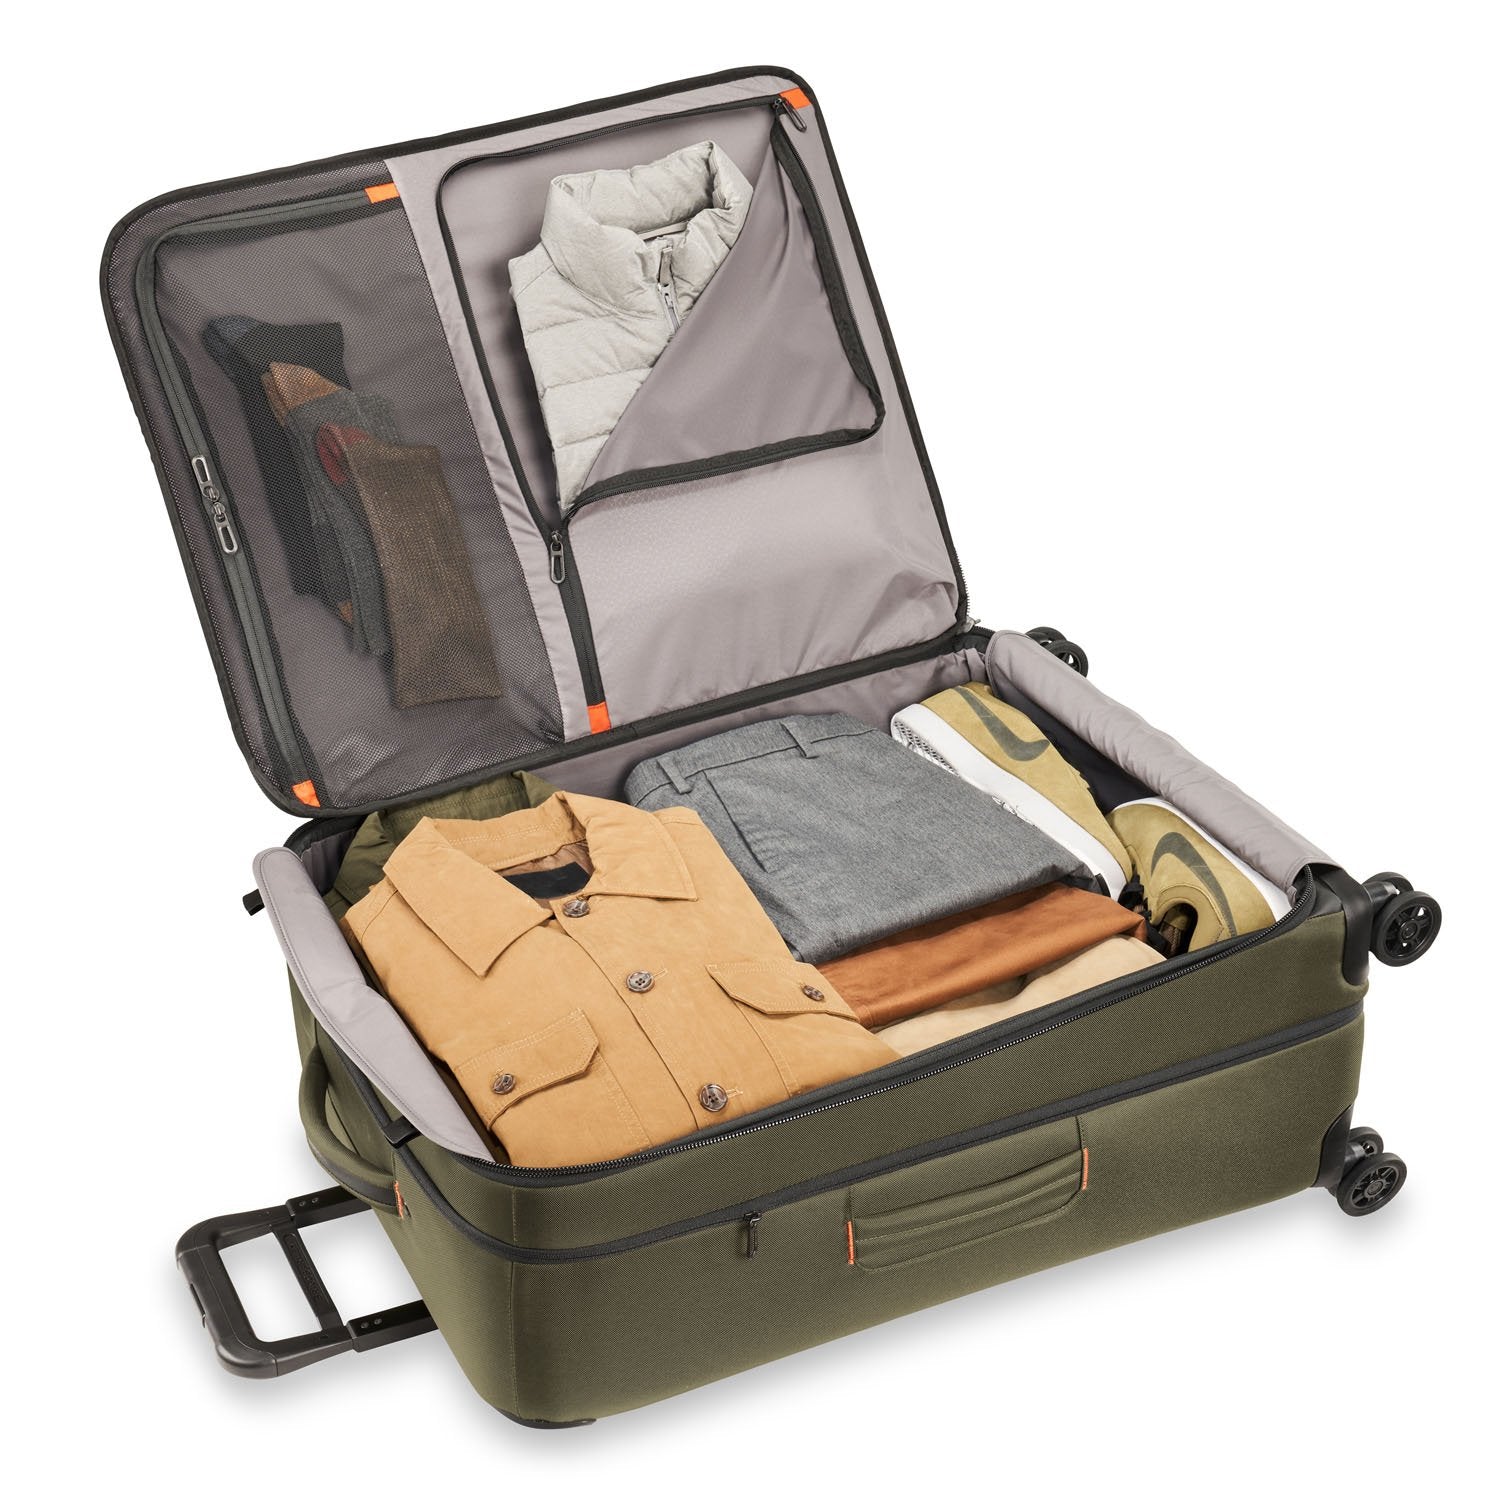 Briggs & Riley ZDX Large Expandable Spinner Luggage Hunter